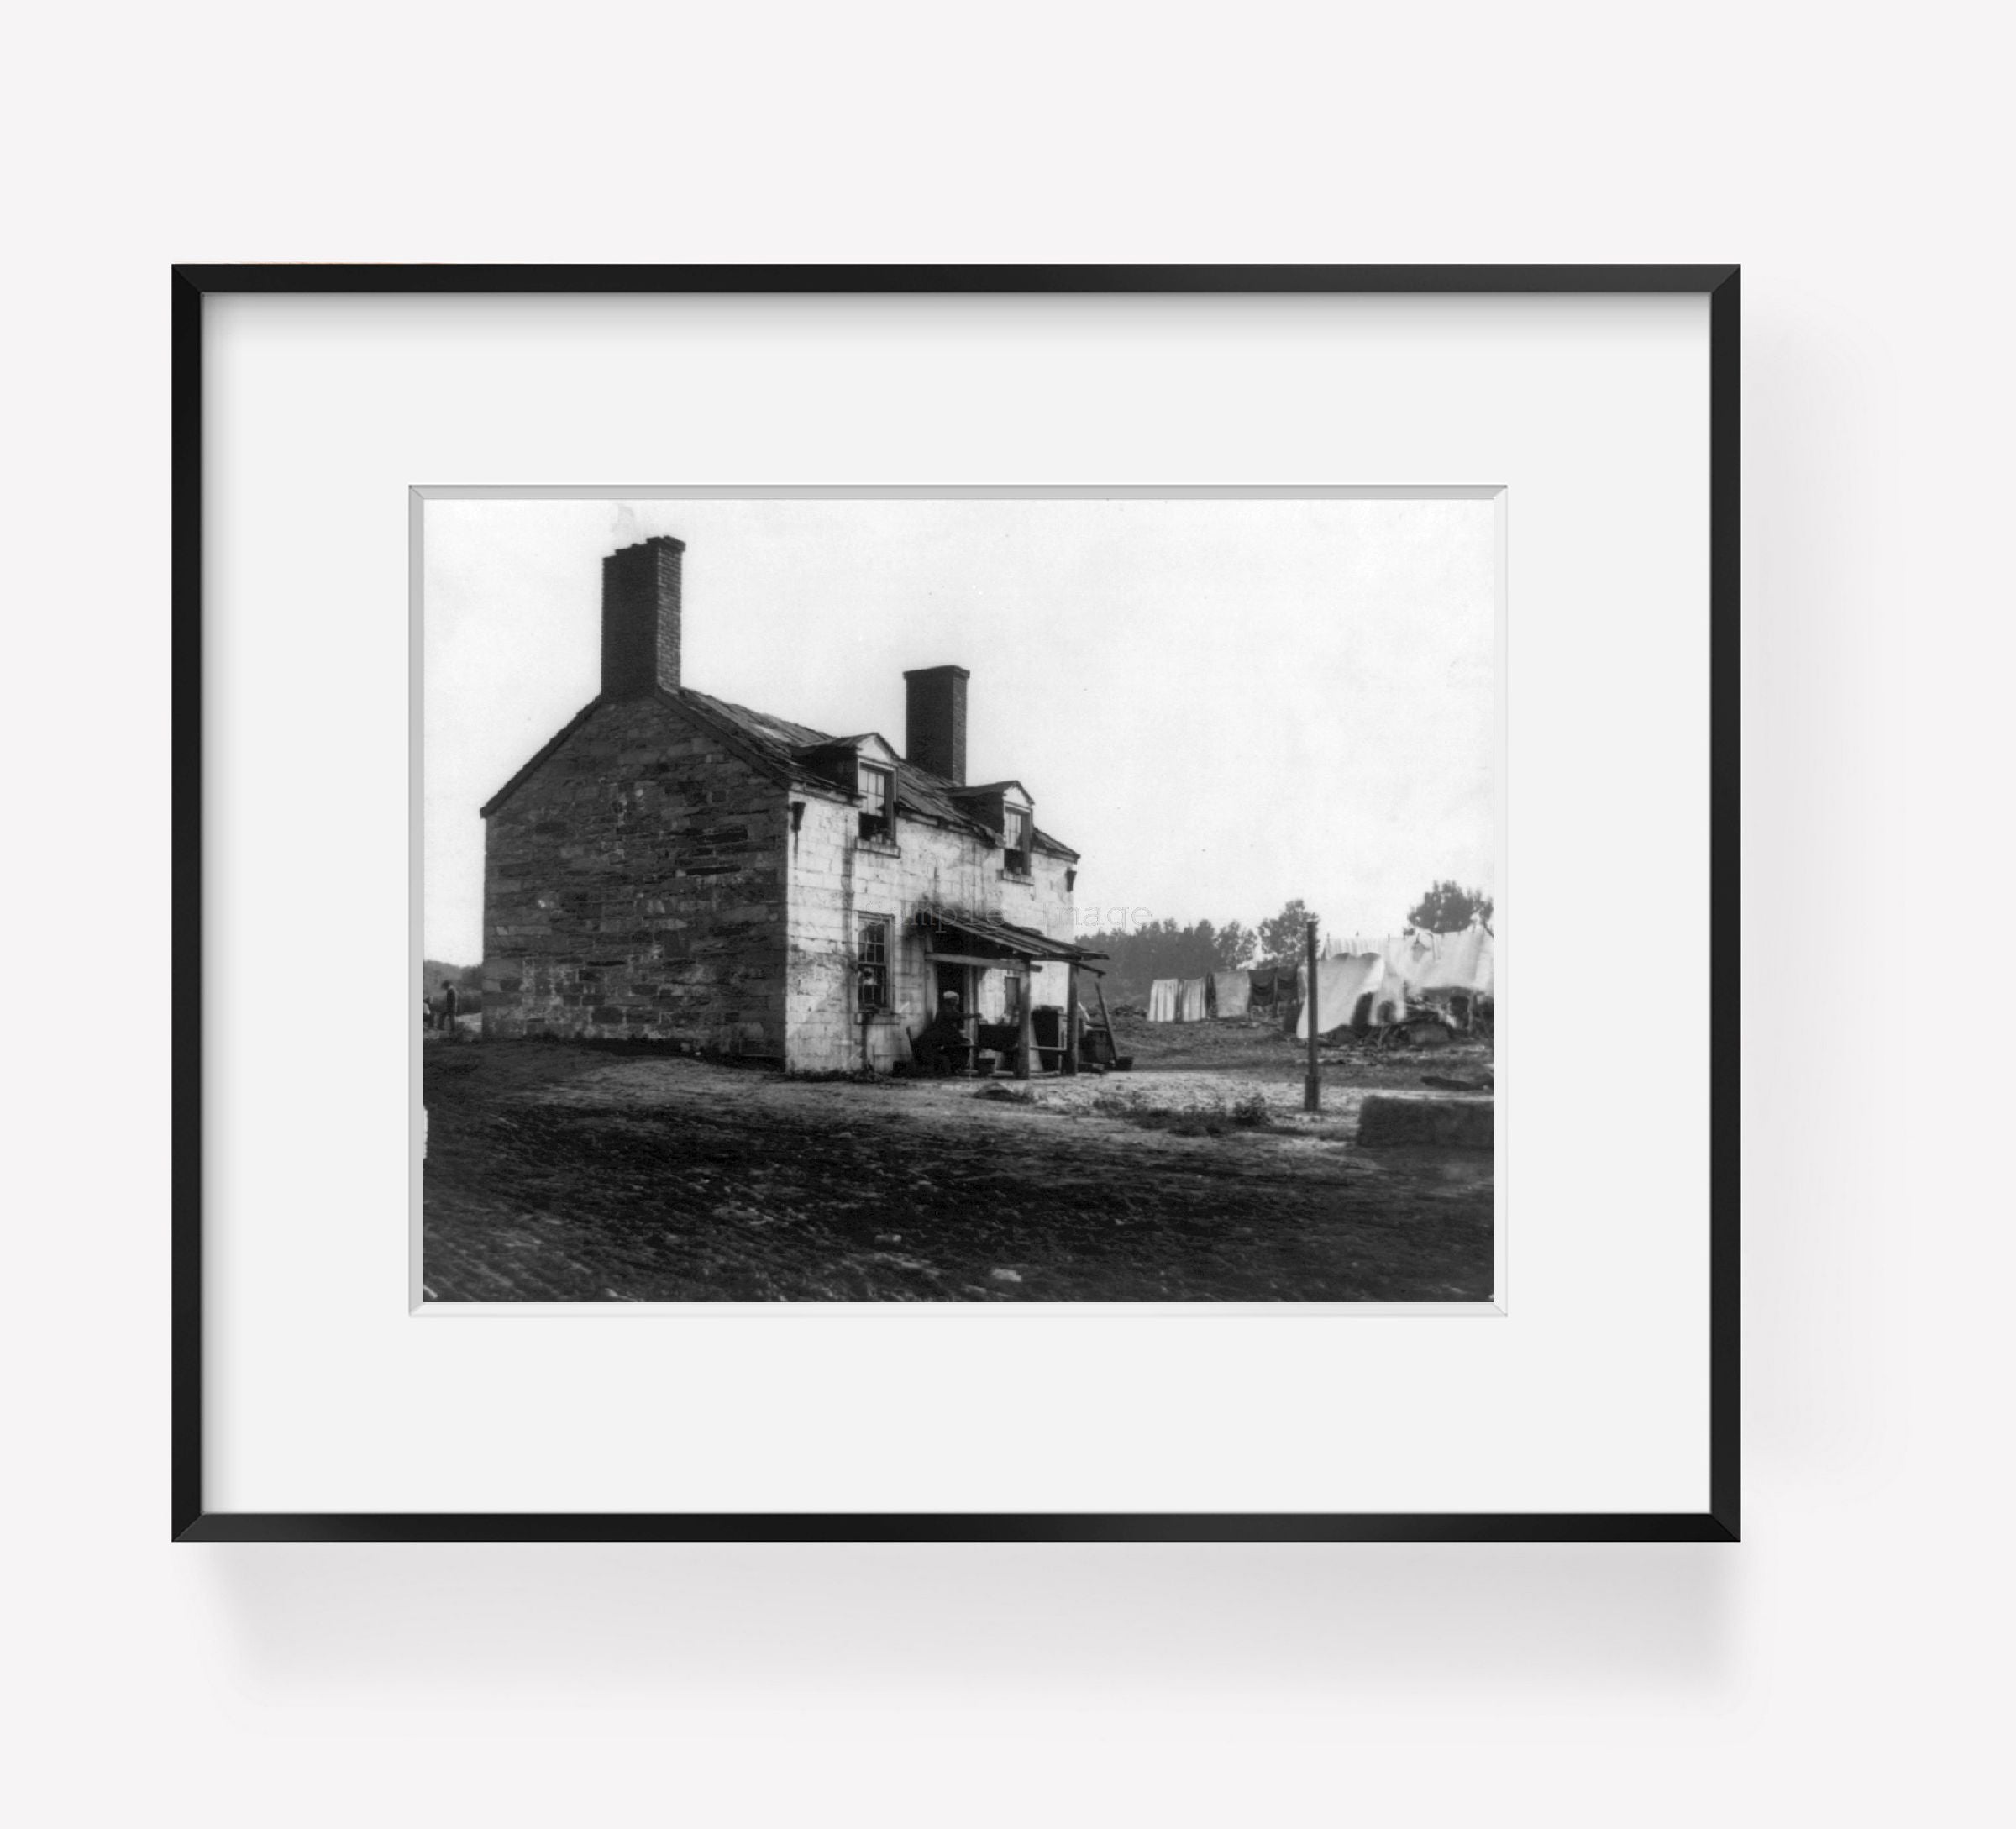 ca. 1870? photograph of Old Locks house still standing Summary: Photograph shows